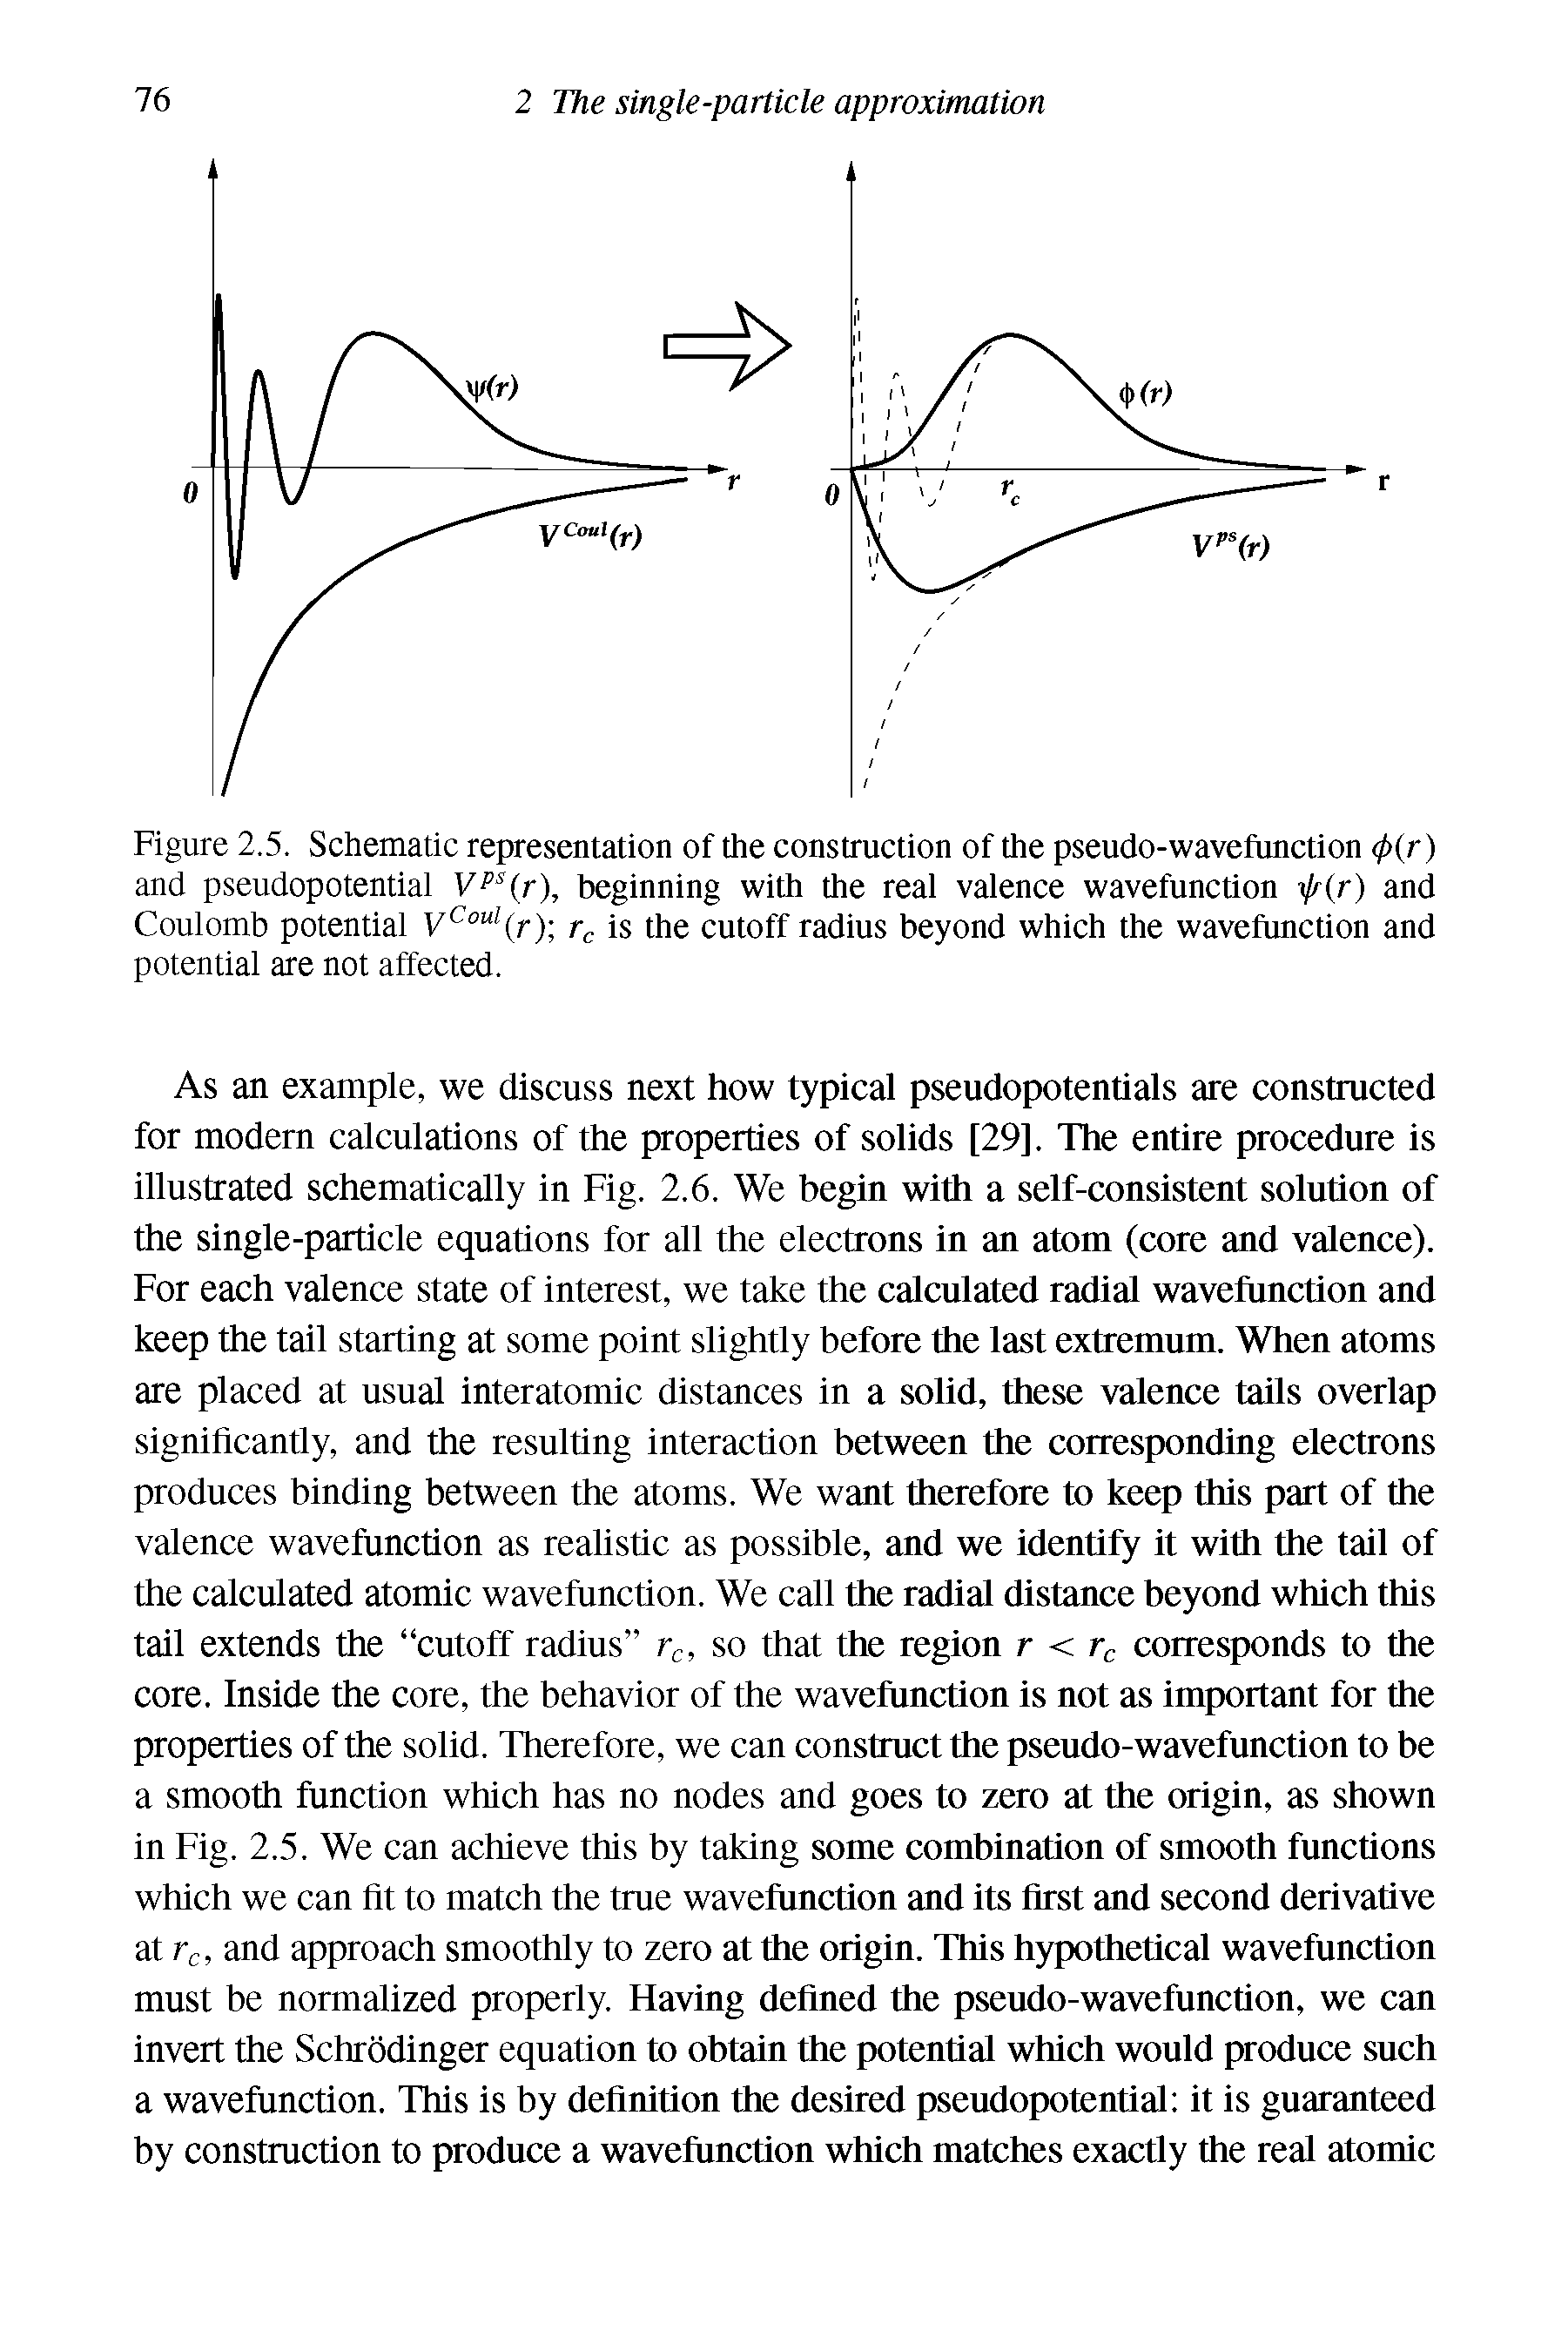 Figure 2.5. Schematic representation of the construction of the pseudo-wavefunction <p r) and pseudopotential V Hr), beginning with the real valence wavefunction (r) and Coulomb potential rc is the cutoff radius beyond which the wavefunction and...